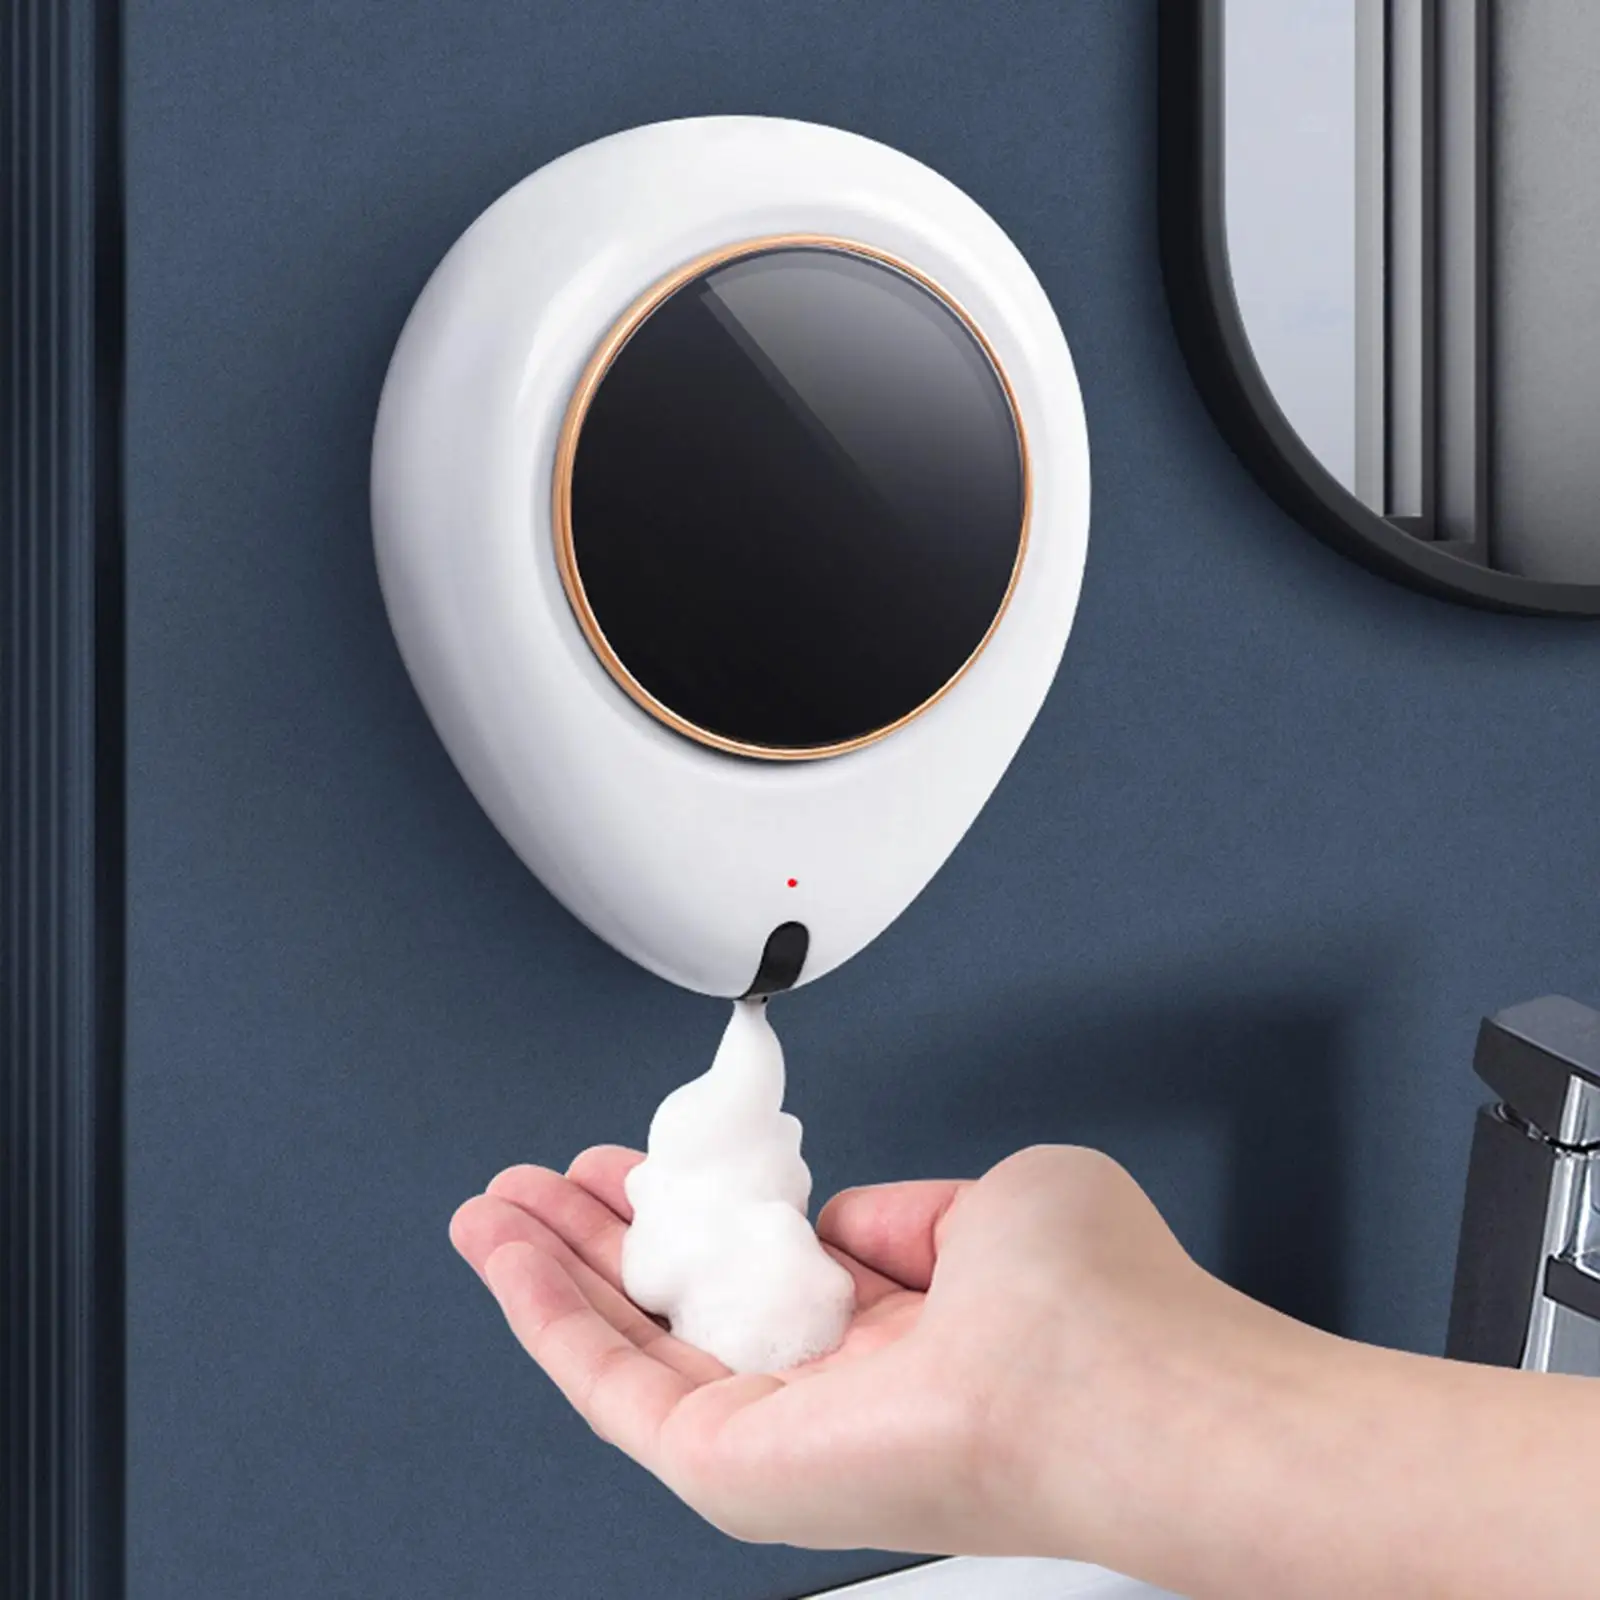 Large Capacity Soap Dispenser Electric Automatic Touch Free Wall Mount for Kitchen